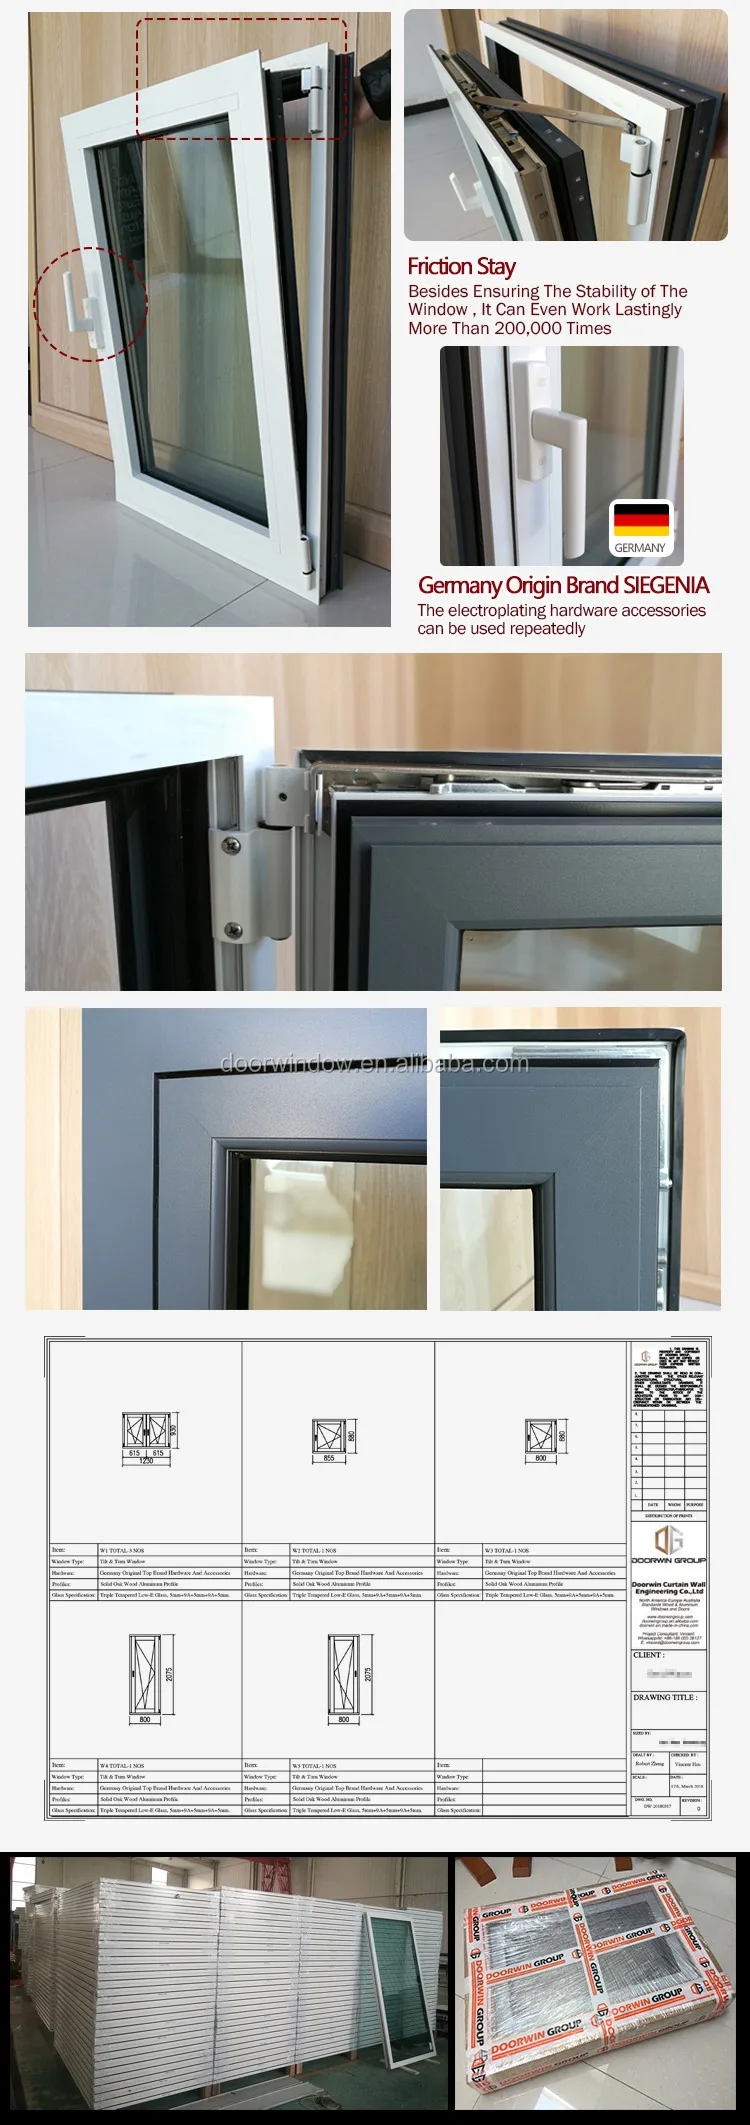 Aluminum casement window with mosquito screen as2047 in australia &amp nz lowes french price